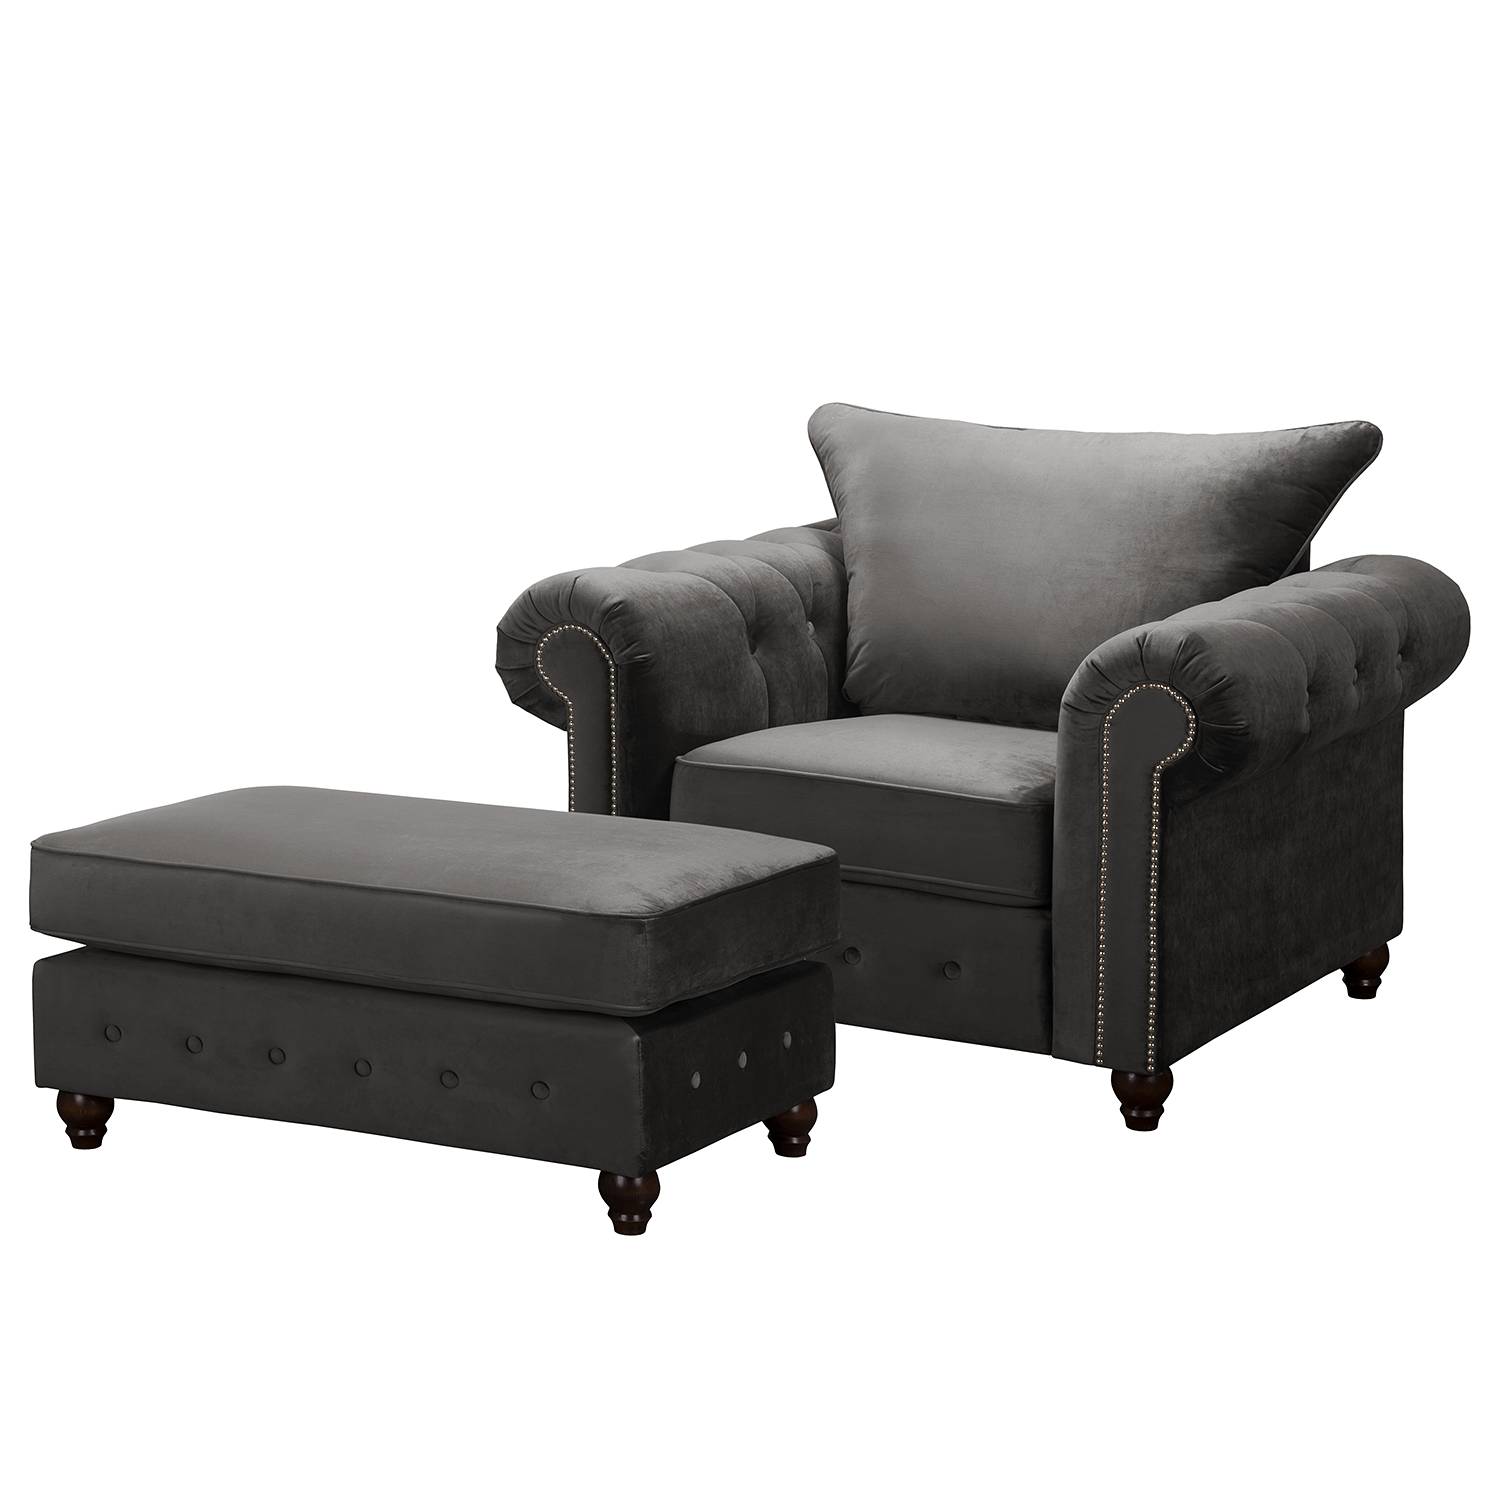 Image of Fauteuil Solita 000000001000135723